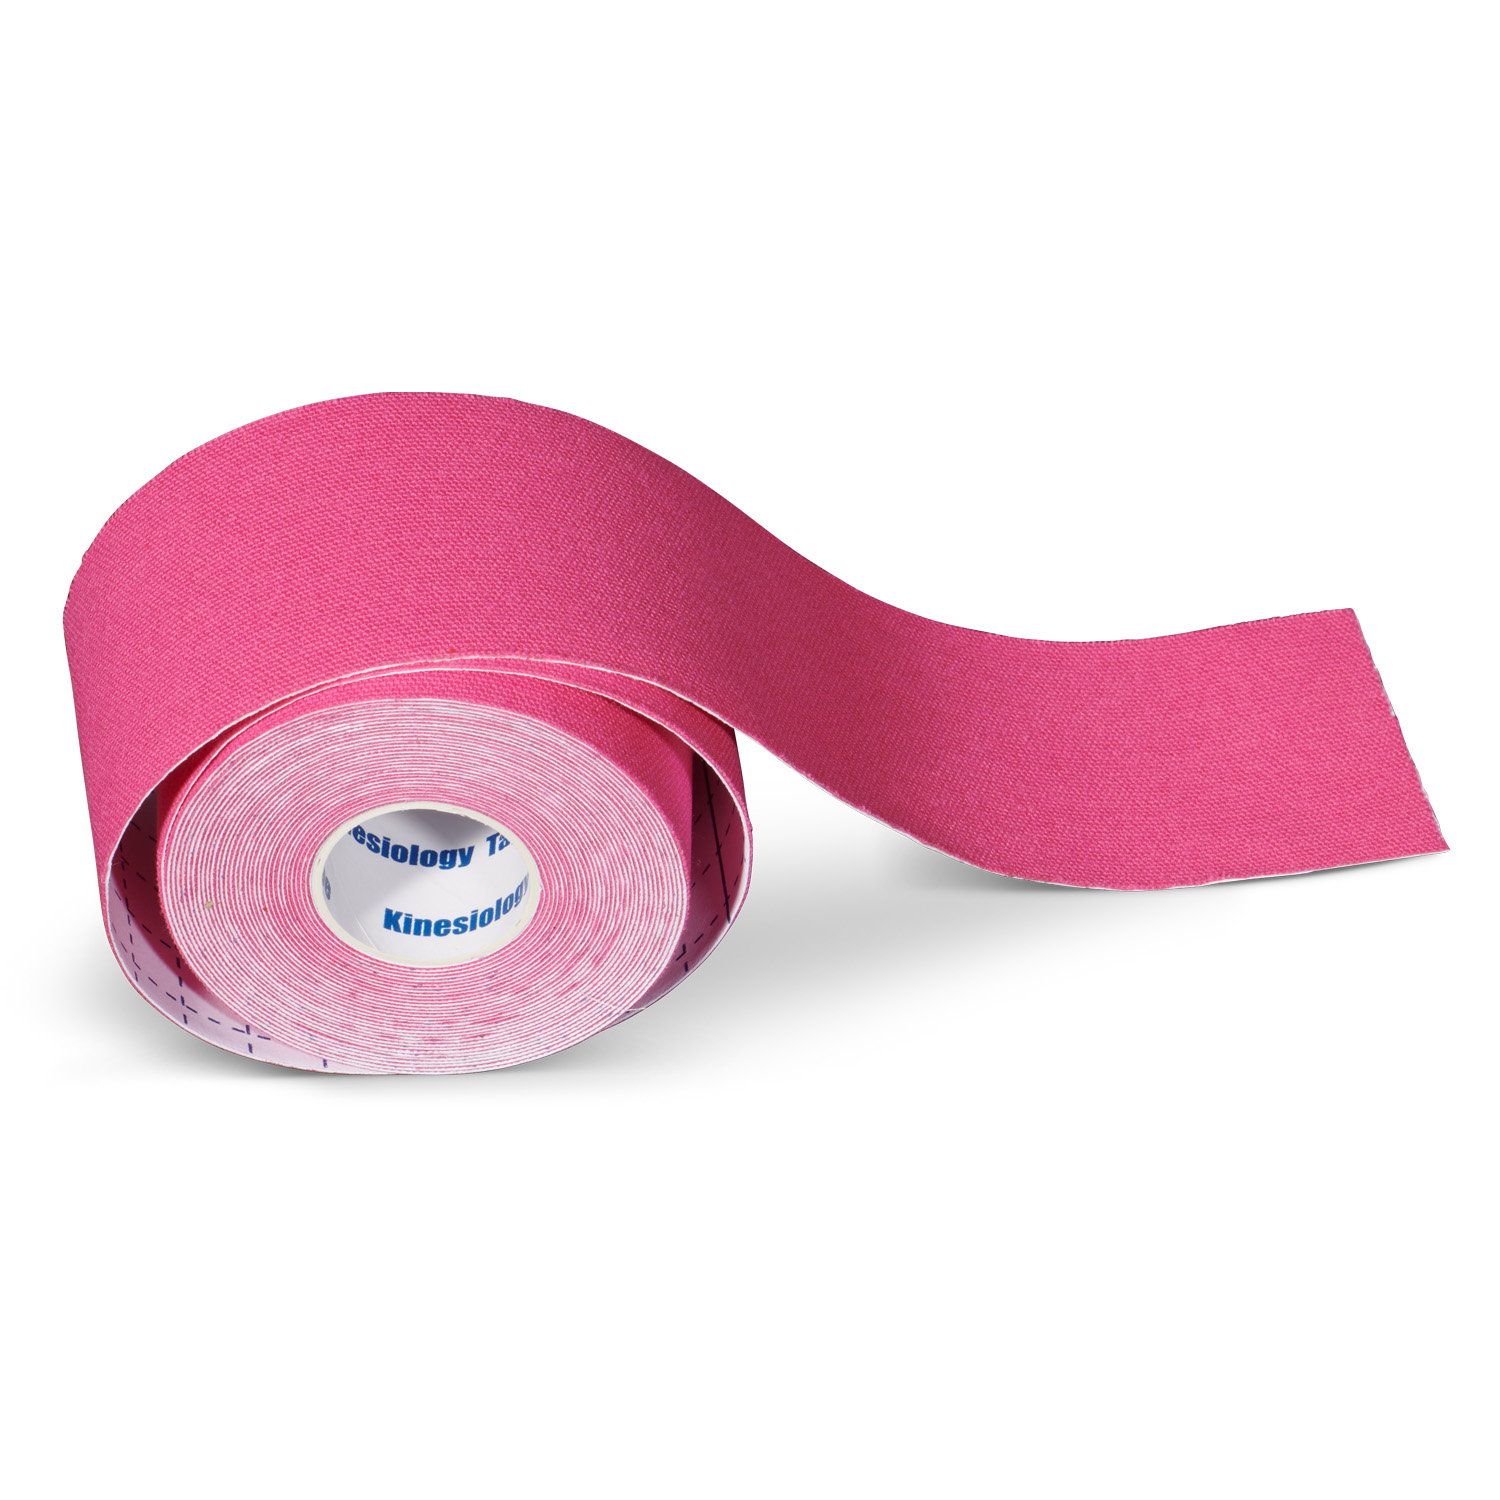 Kinesiology tape per roll pink